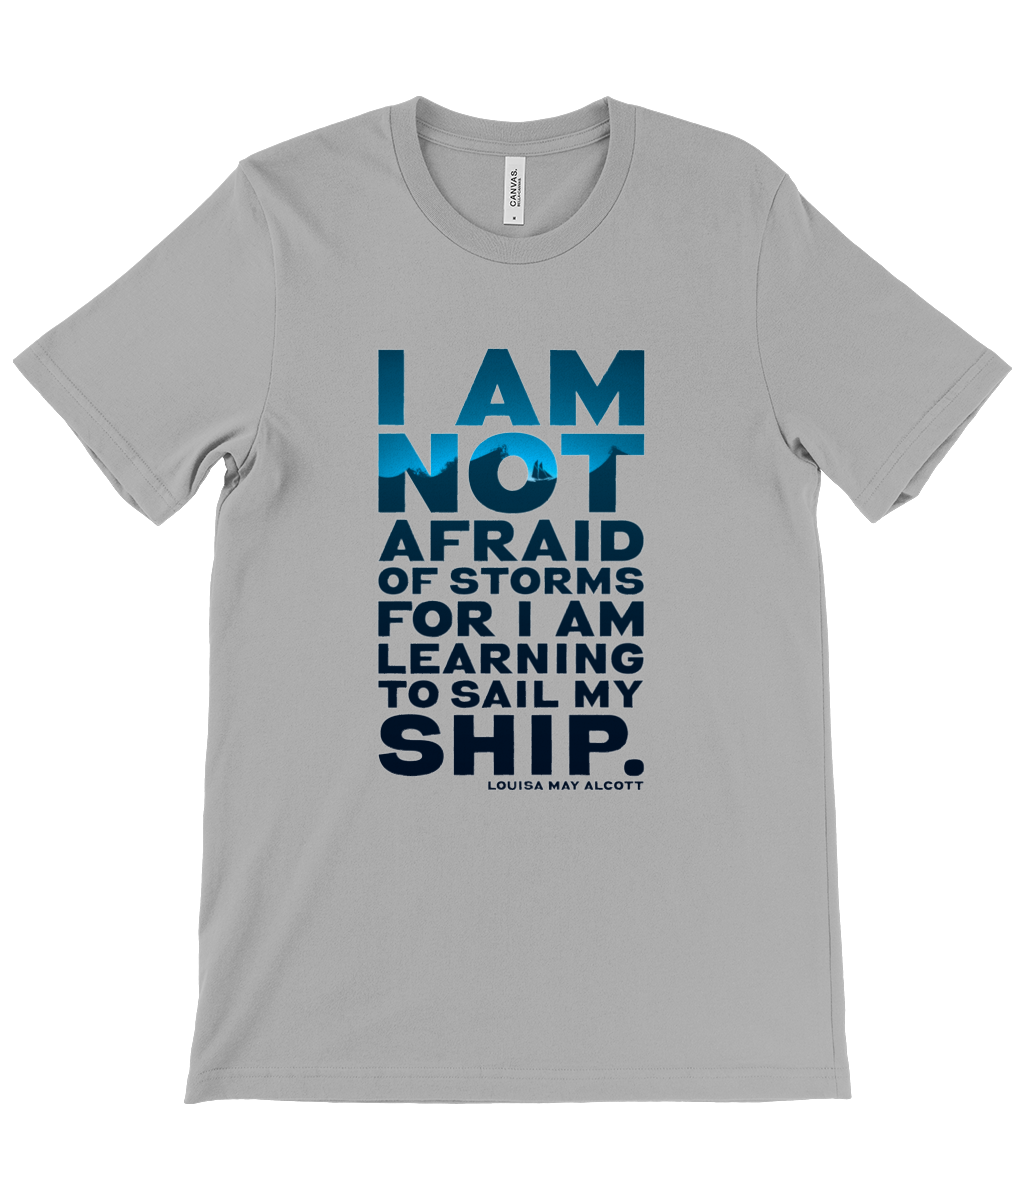 Canvas Unisex Crew Neck T-Shirt - "I am not afraid of storms for I am learning to sail my ship" Louisa May Alcott, Little Women